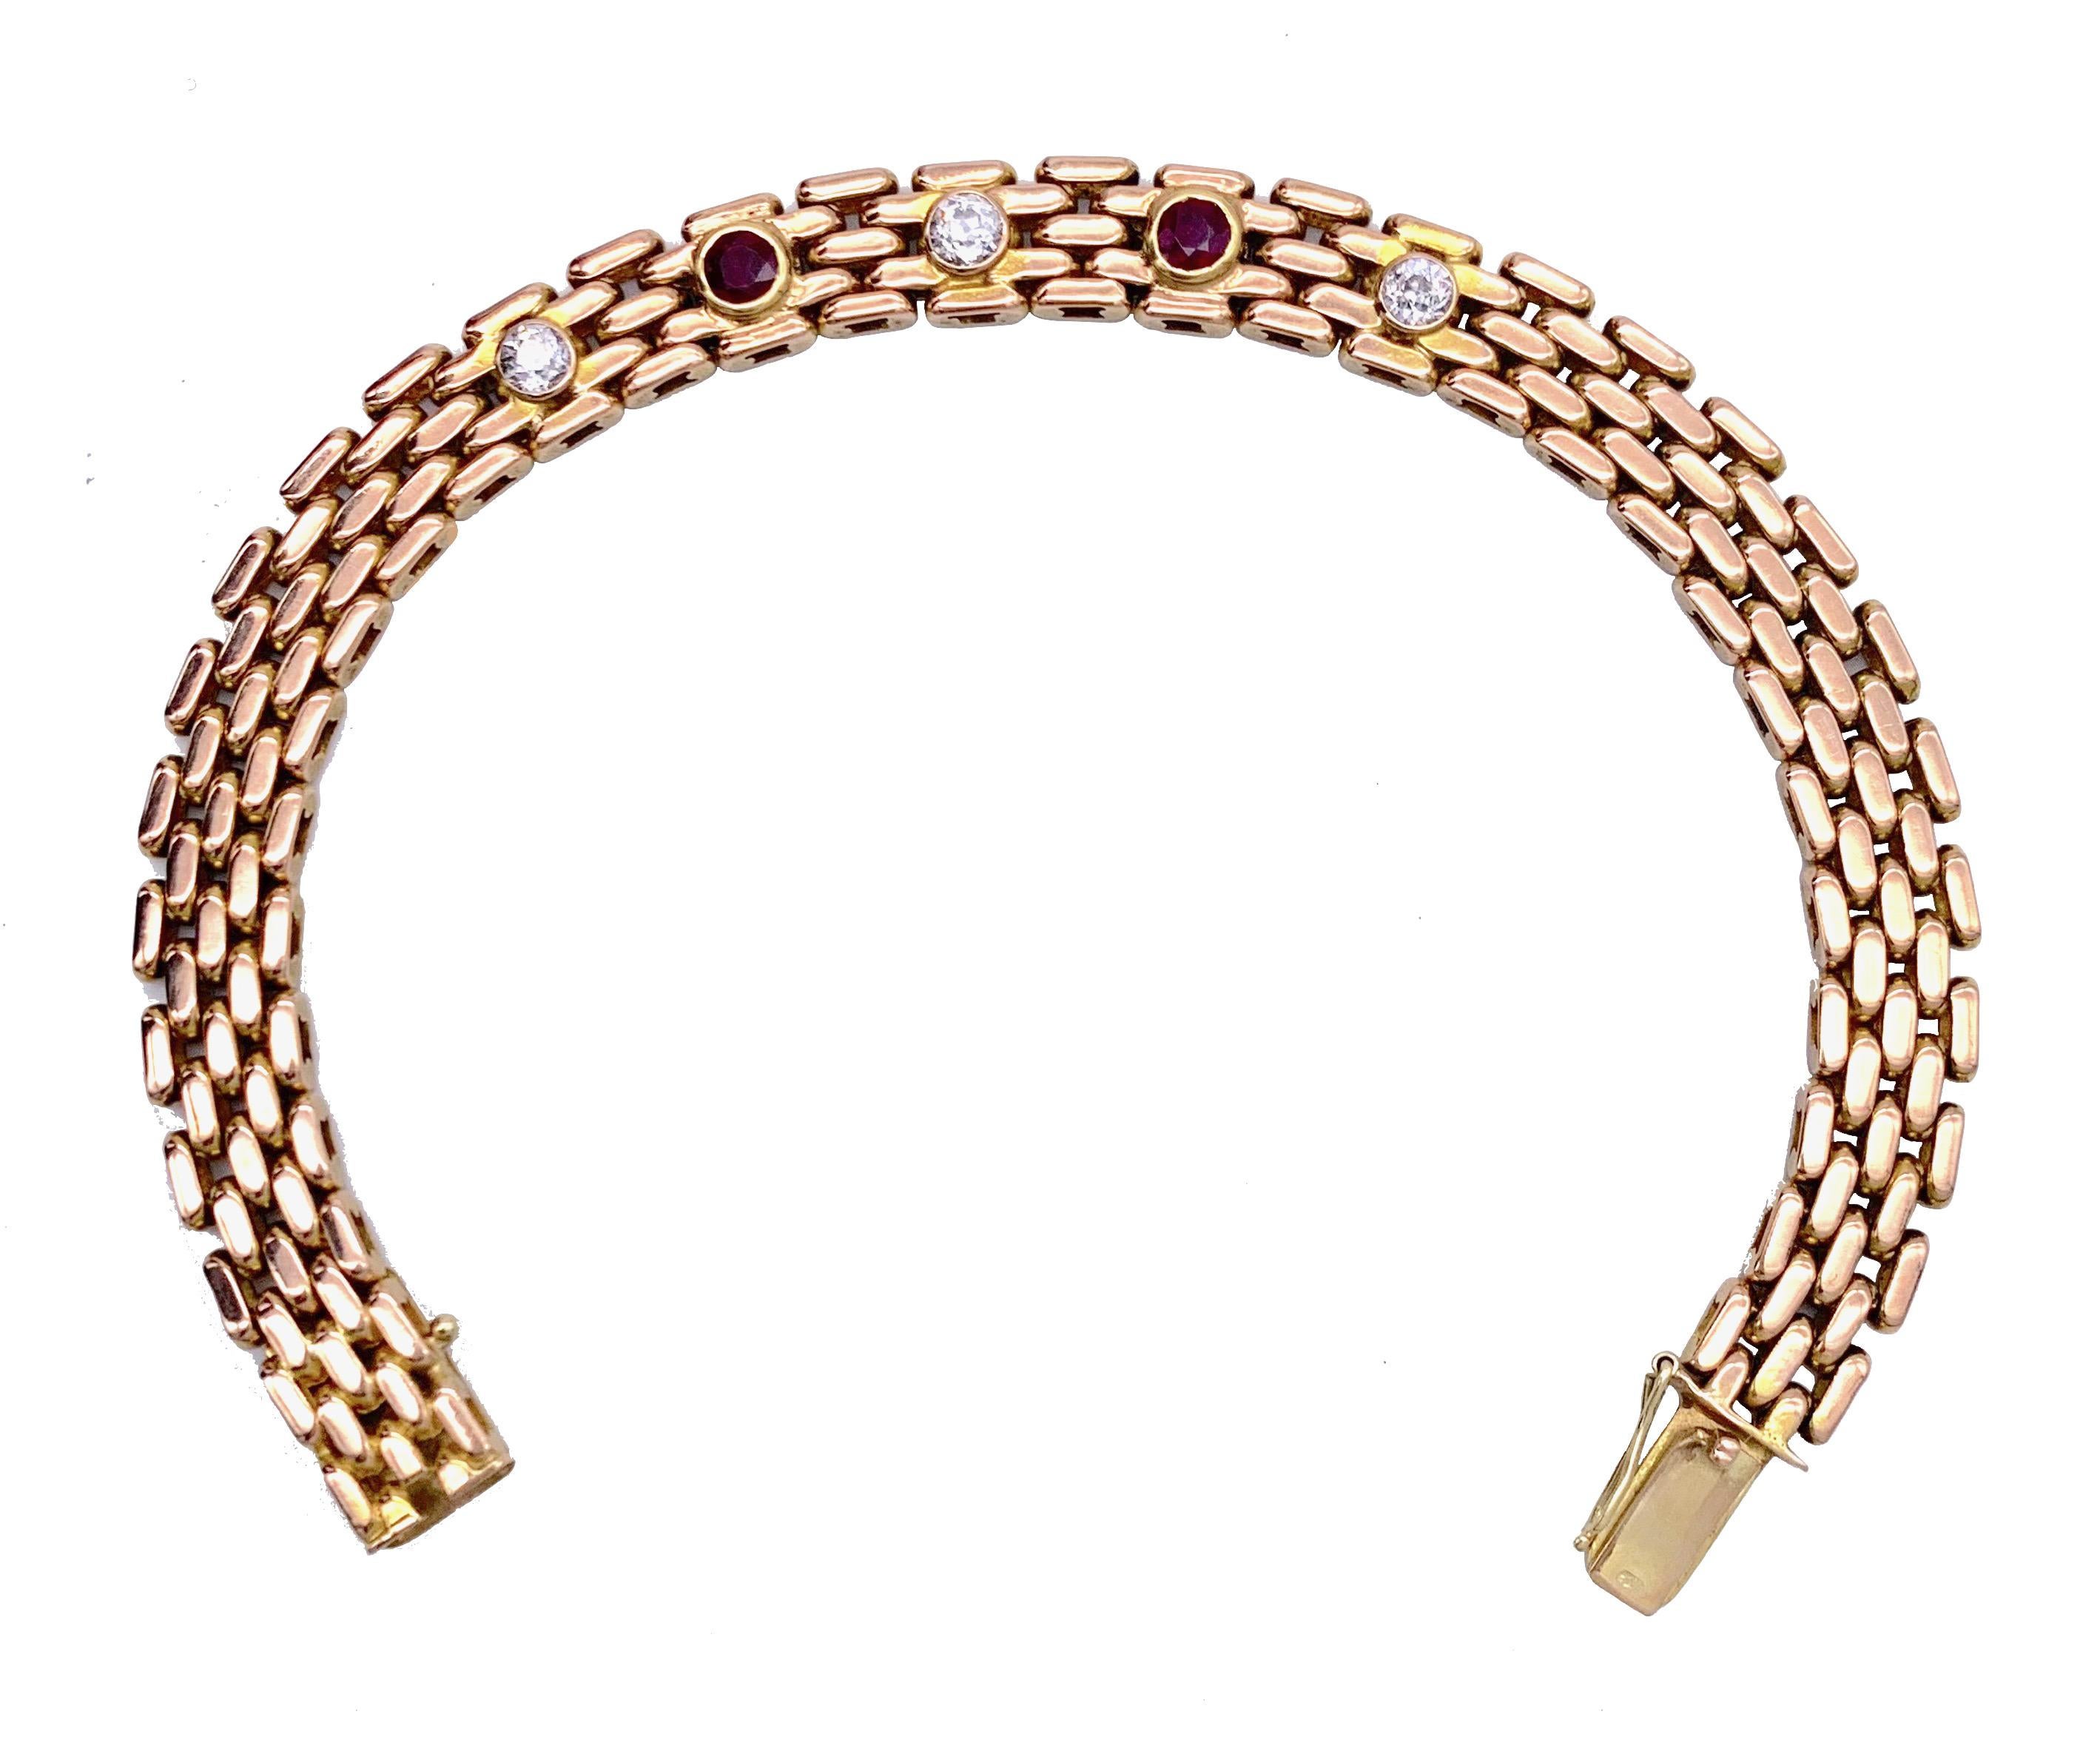 This fine ruby and Diamond Gate bracelet was made in Vienna at the beginning of the 20th century out of 14 karat Gold. It is stamped with the 14 Karat gold hallmark  in use between 1901-1921.